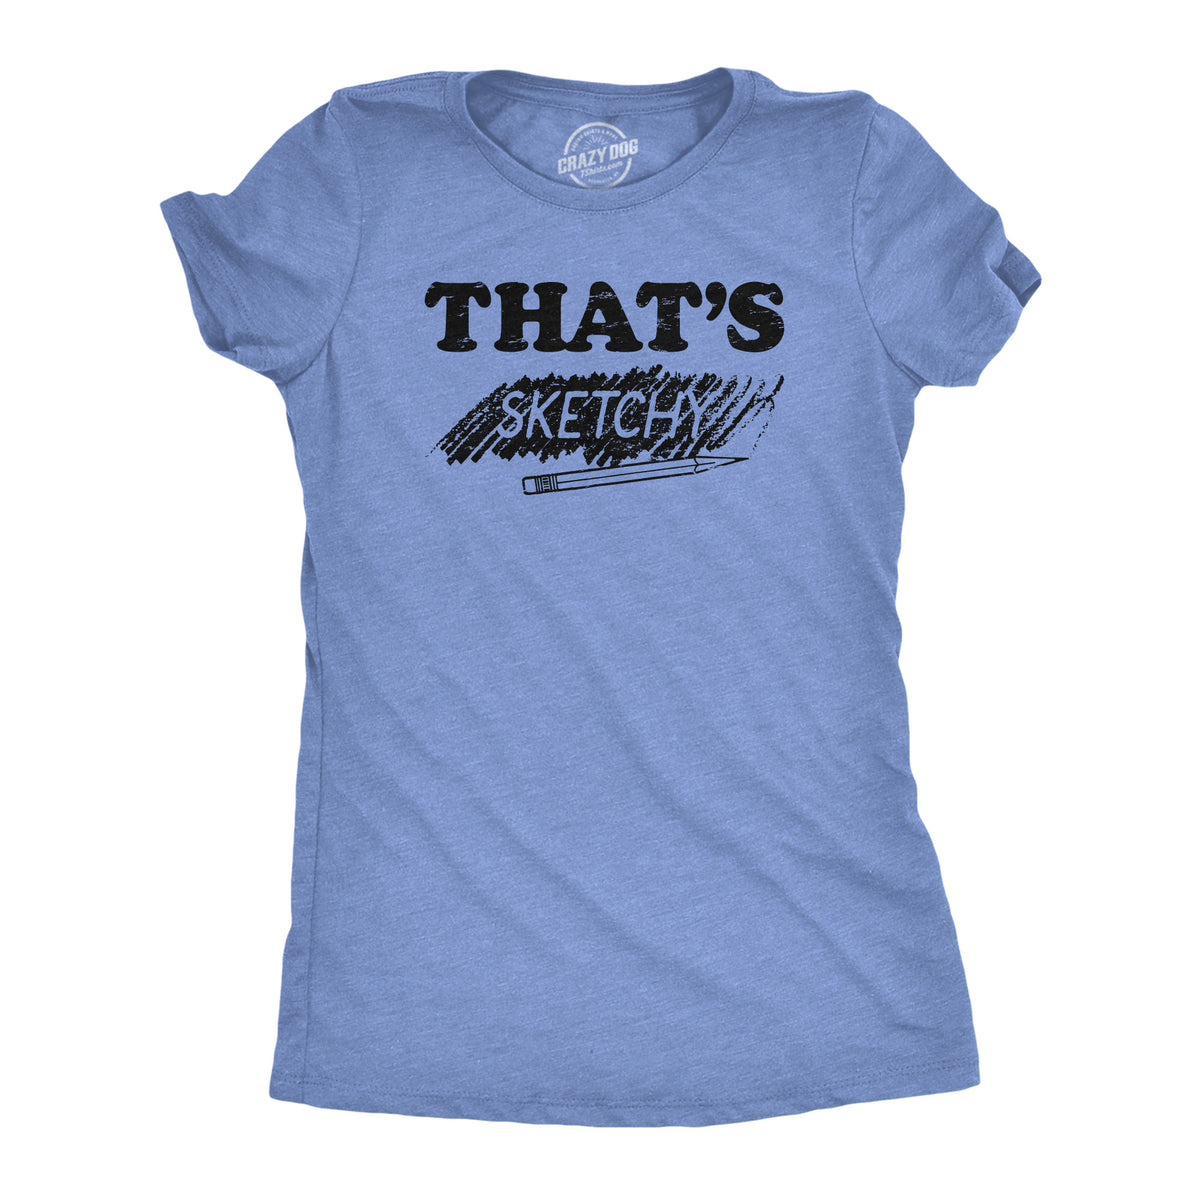 Funny Light Heather Blue - SKETCHY Thats Sketchy Womens T Shirt Nerdy sarcastic Tee